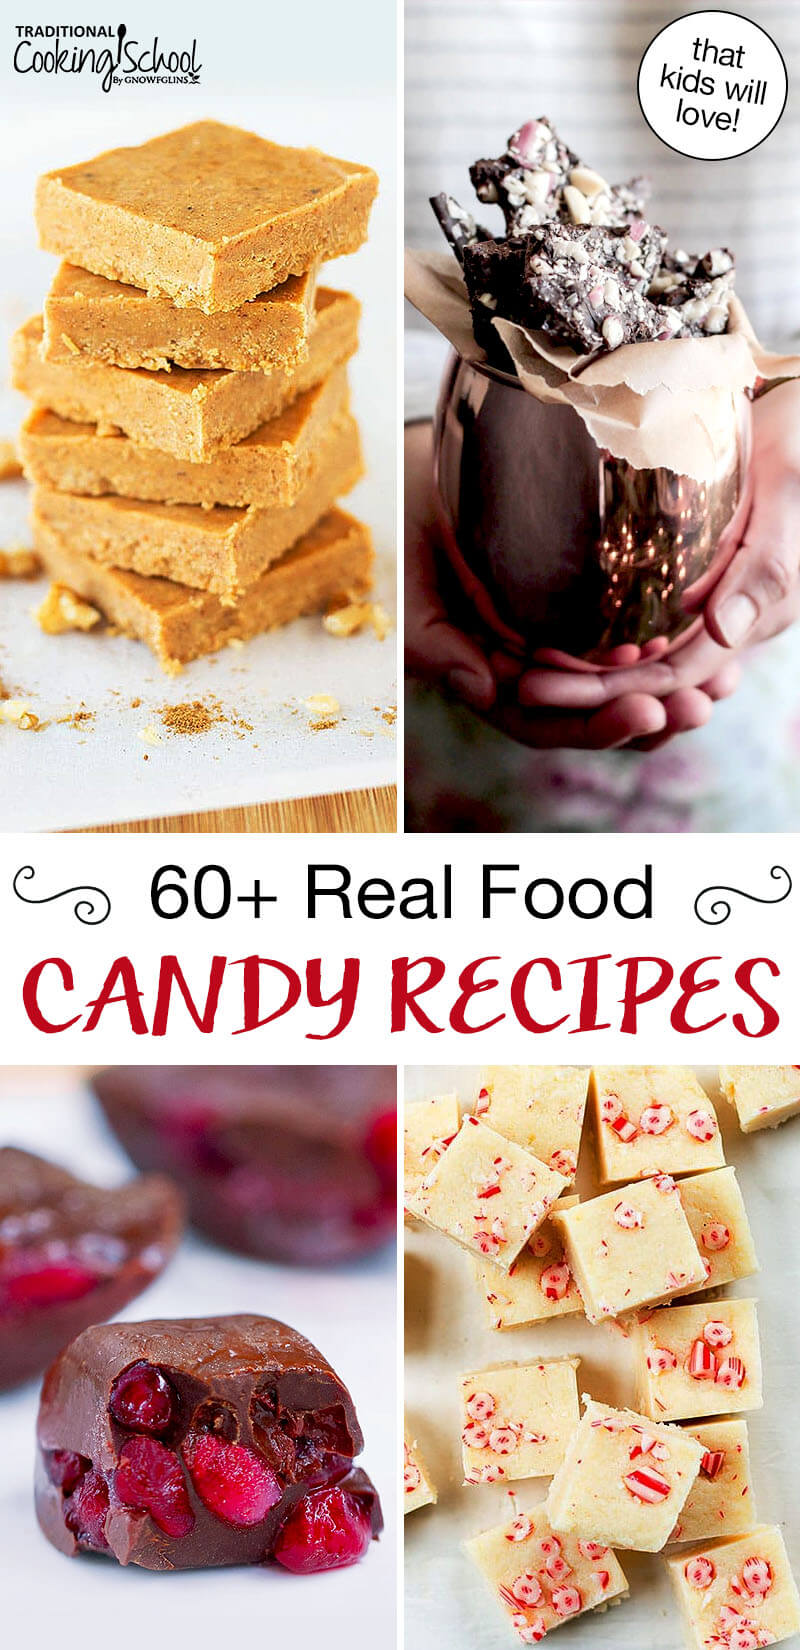 Photo collage of homemade candies including pumpkin fudge and chocolate bark. Text overlay says: "60+ Real Food Candy Recipes (that kids will love!)"